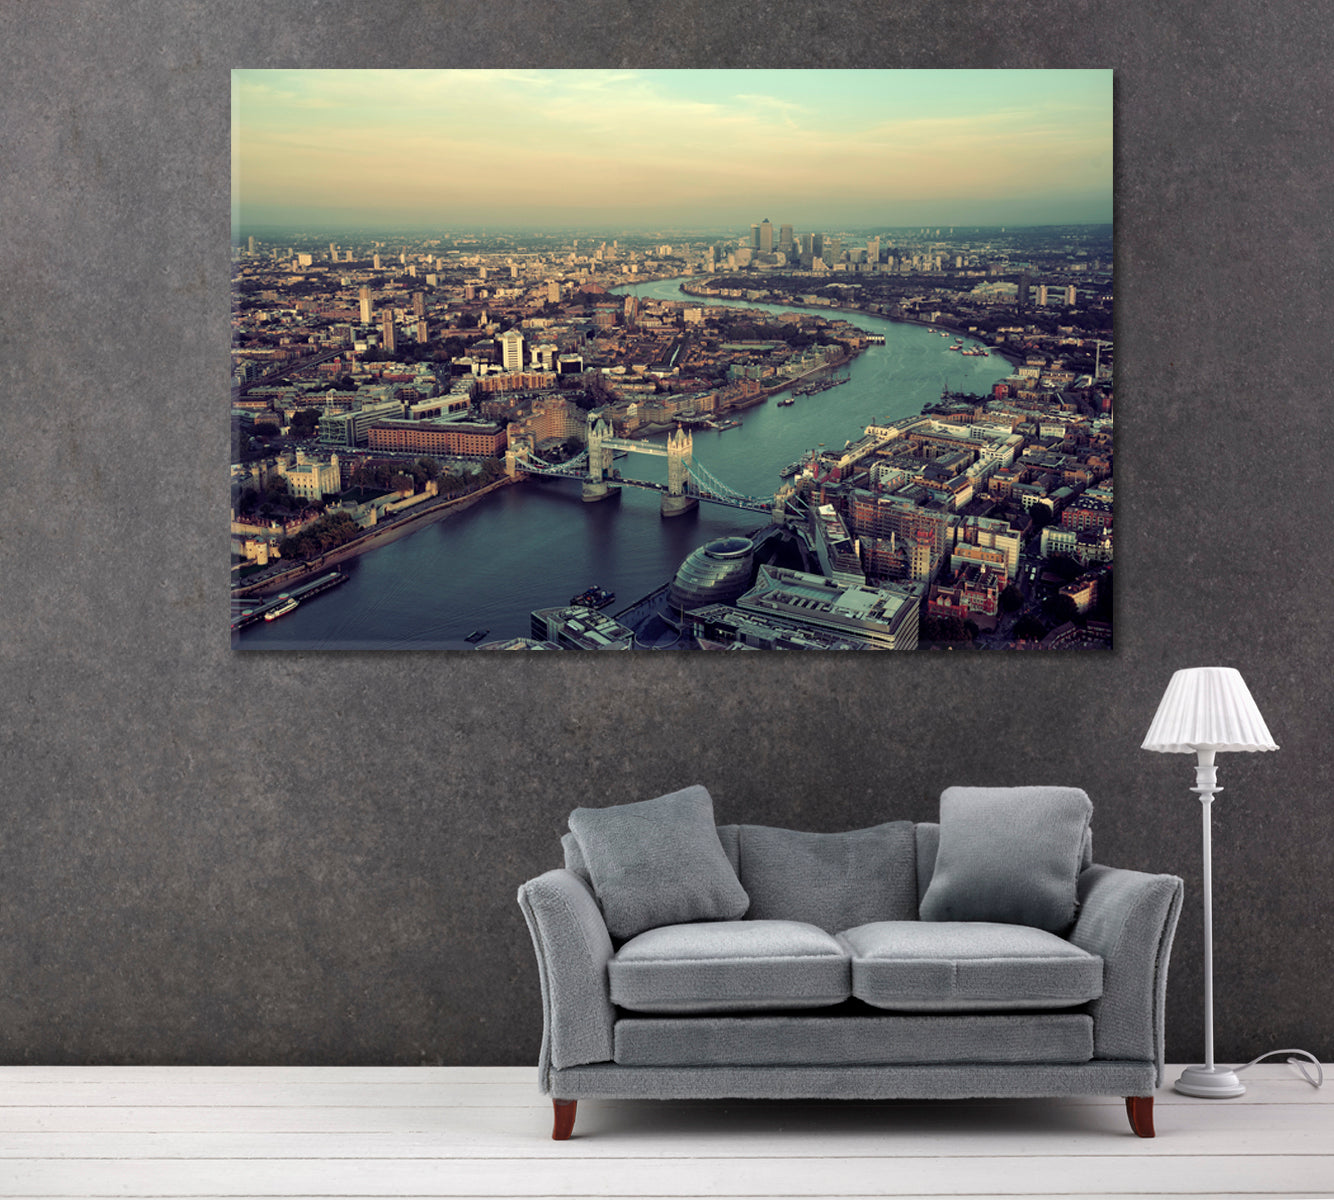 London Skyline with Thames River Canvas Print ArtLexy 1 Panel 24"x16" inches 